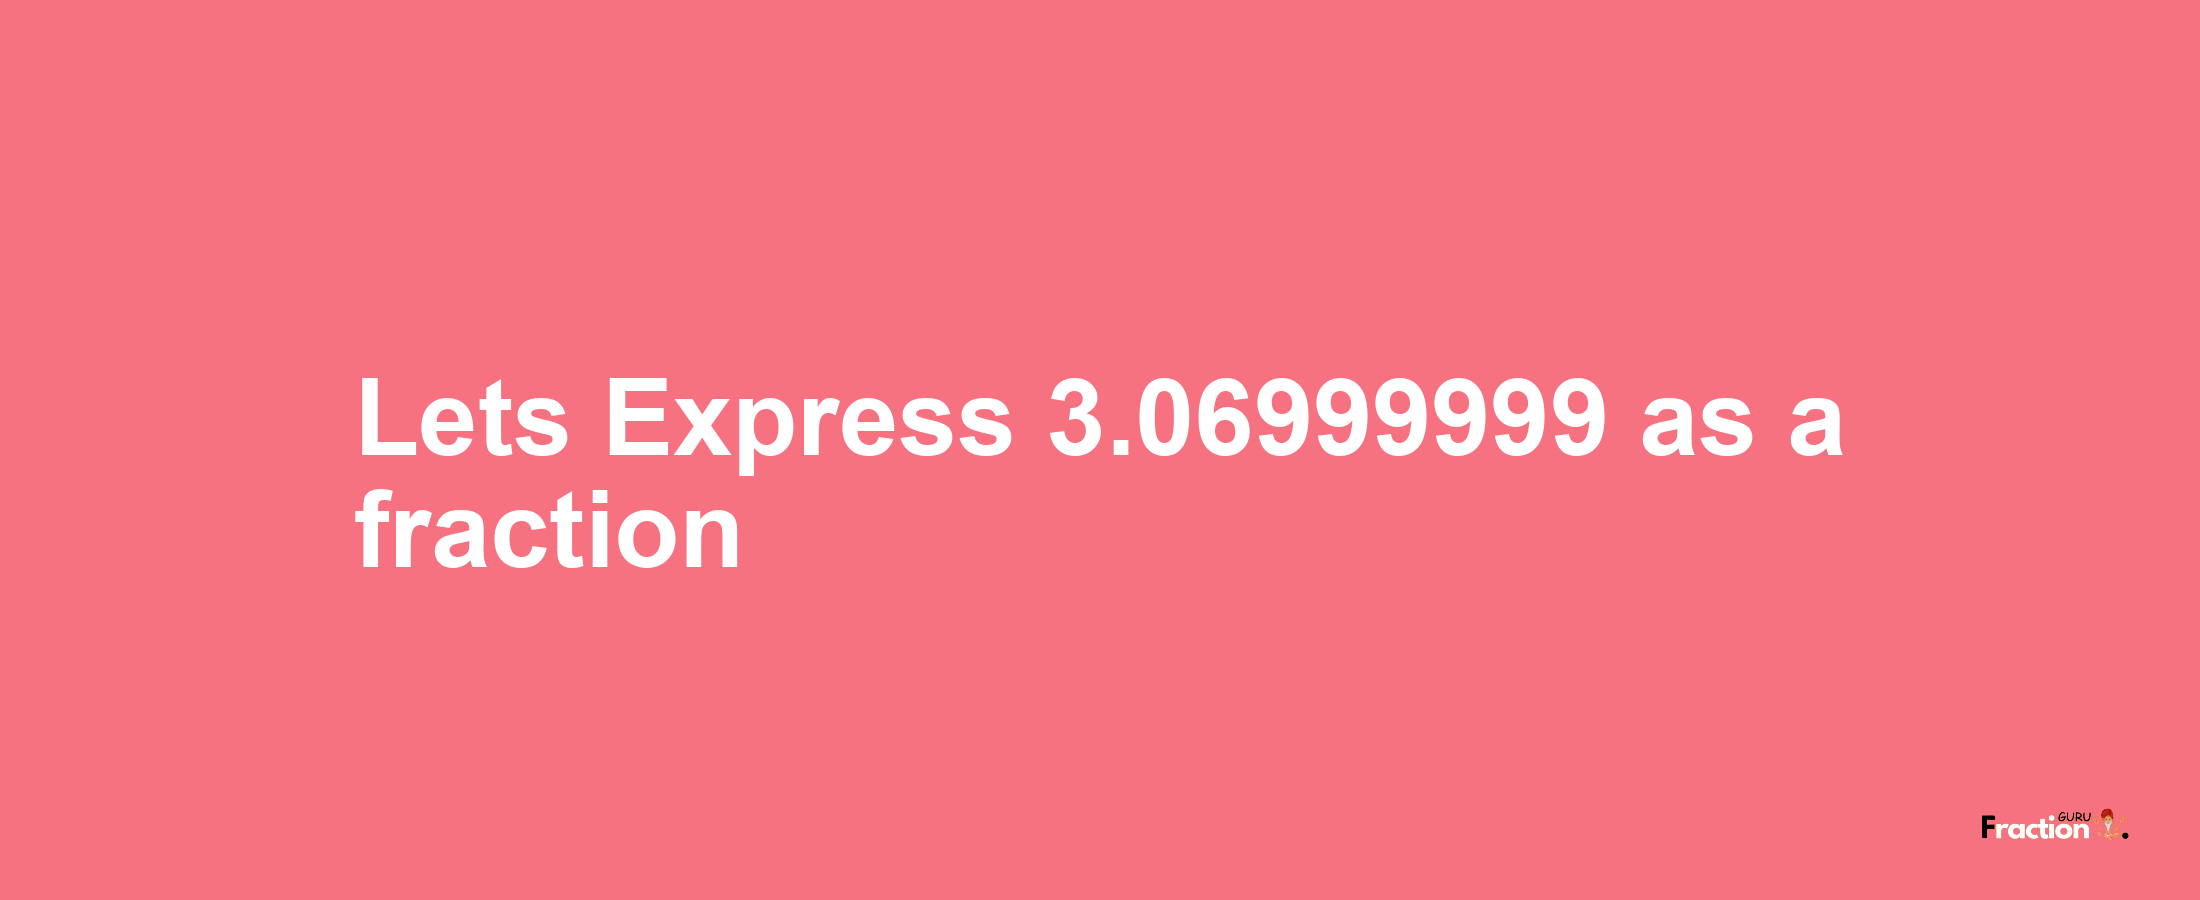 Lets Express 3.06999999 as afraction